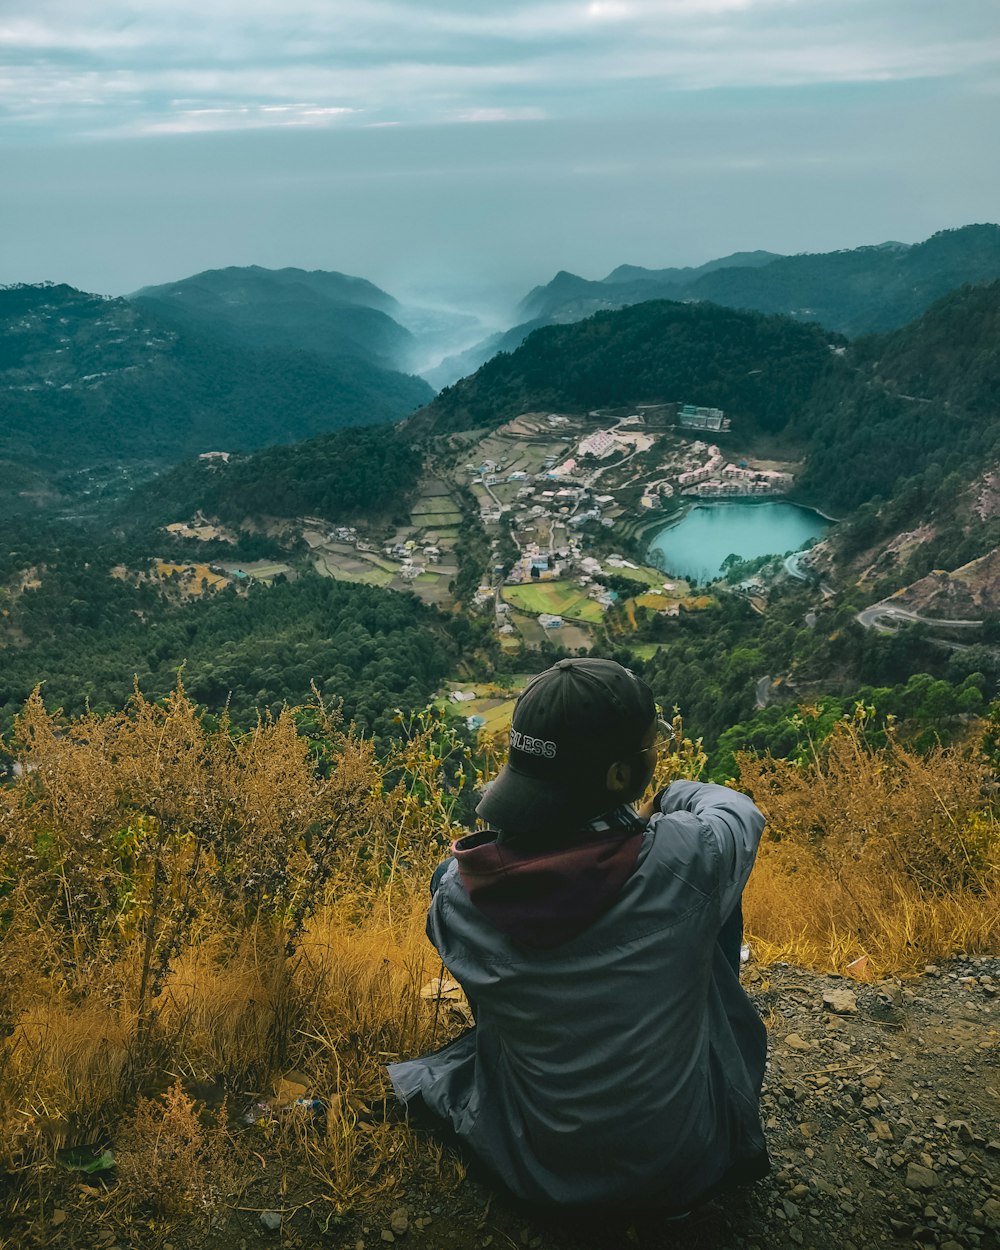 a person sitting on a hill overlooking a valley